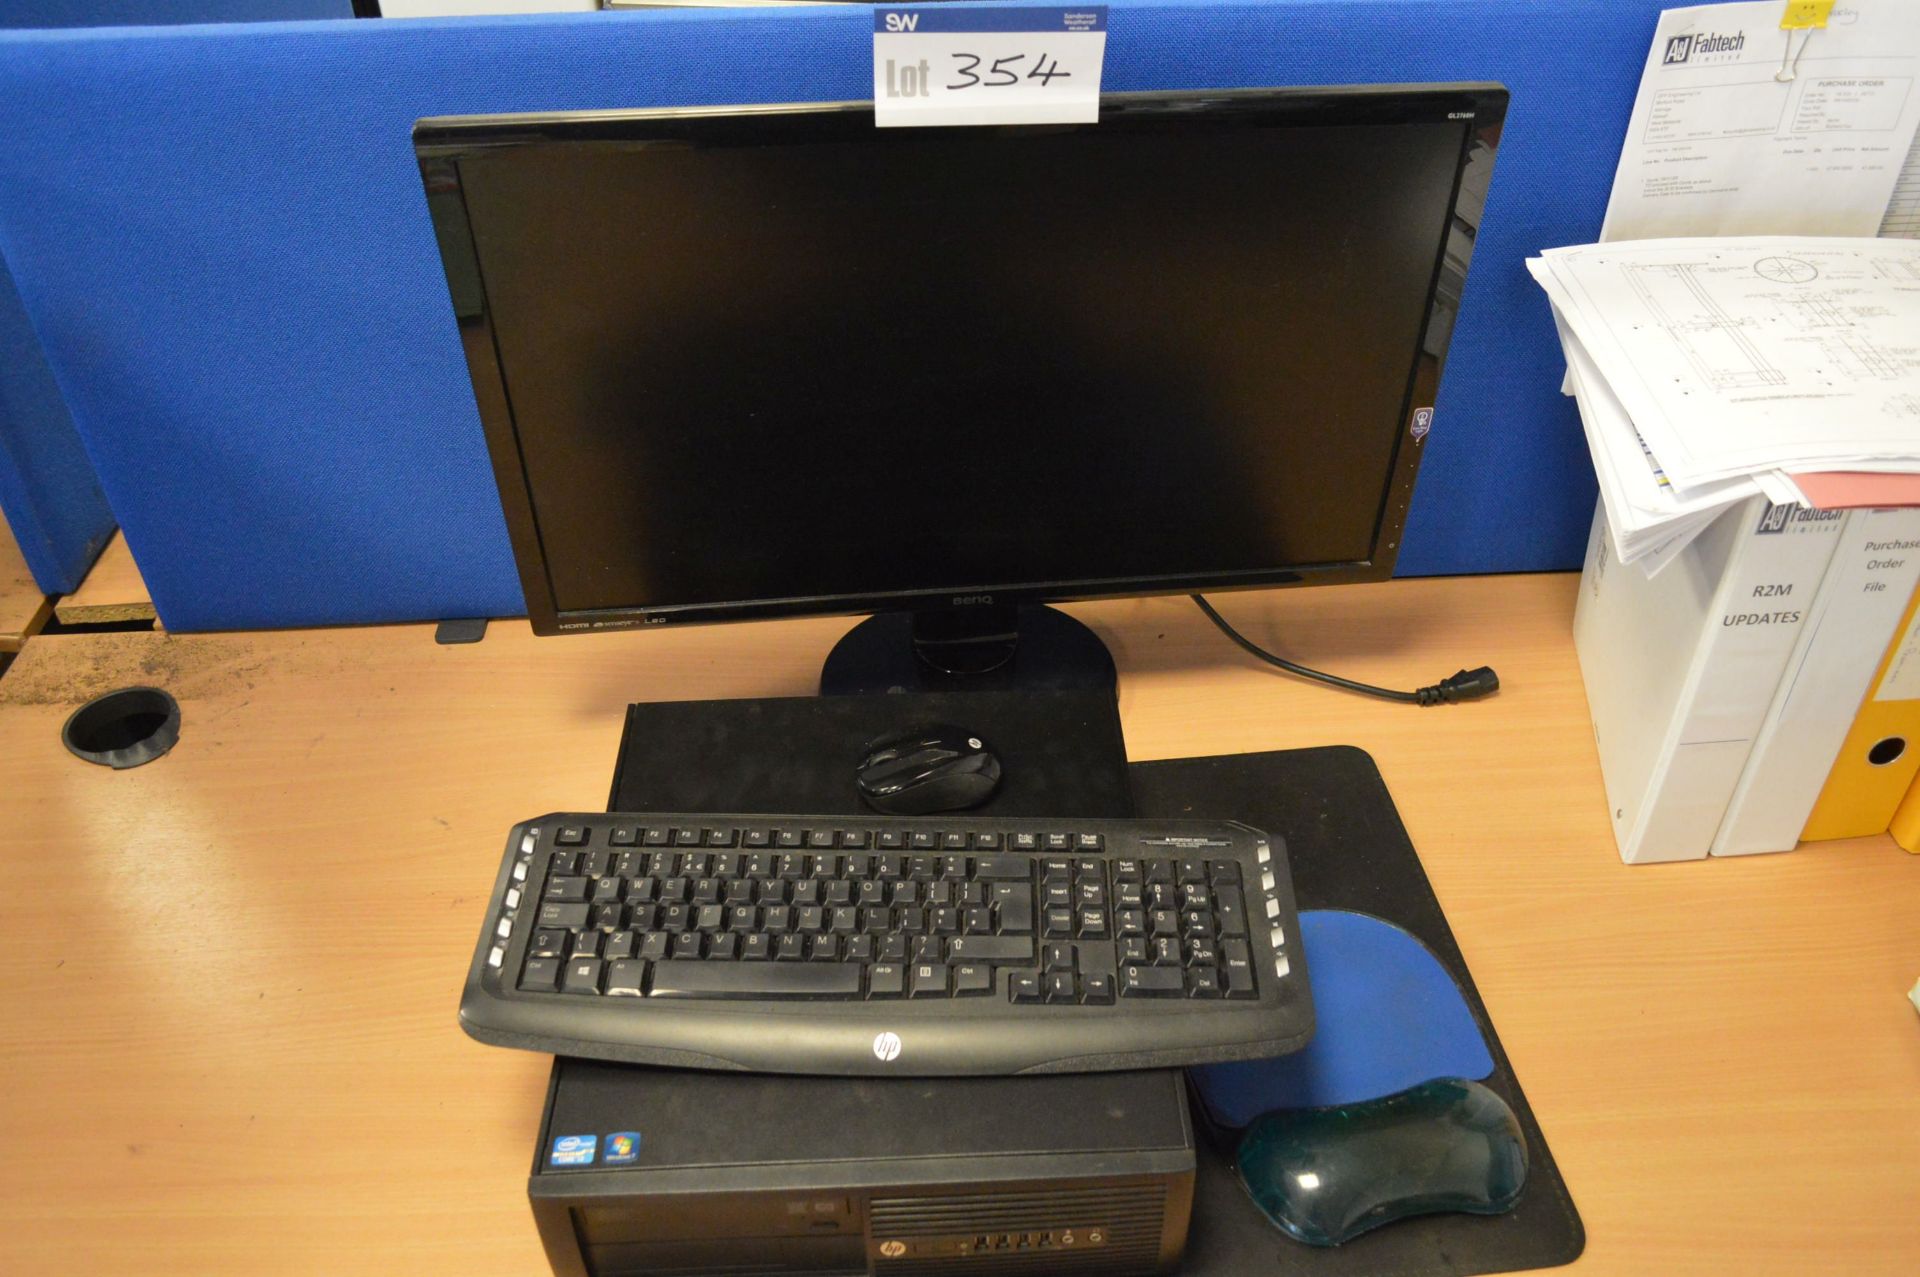 HP Intel Core i3 Desktop Personal Computer (hard disk removed), with Benq GL2760H monitor